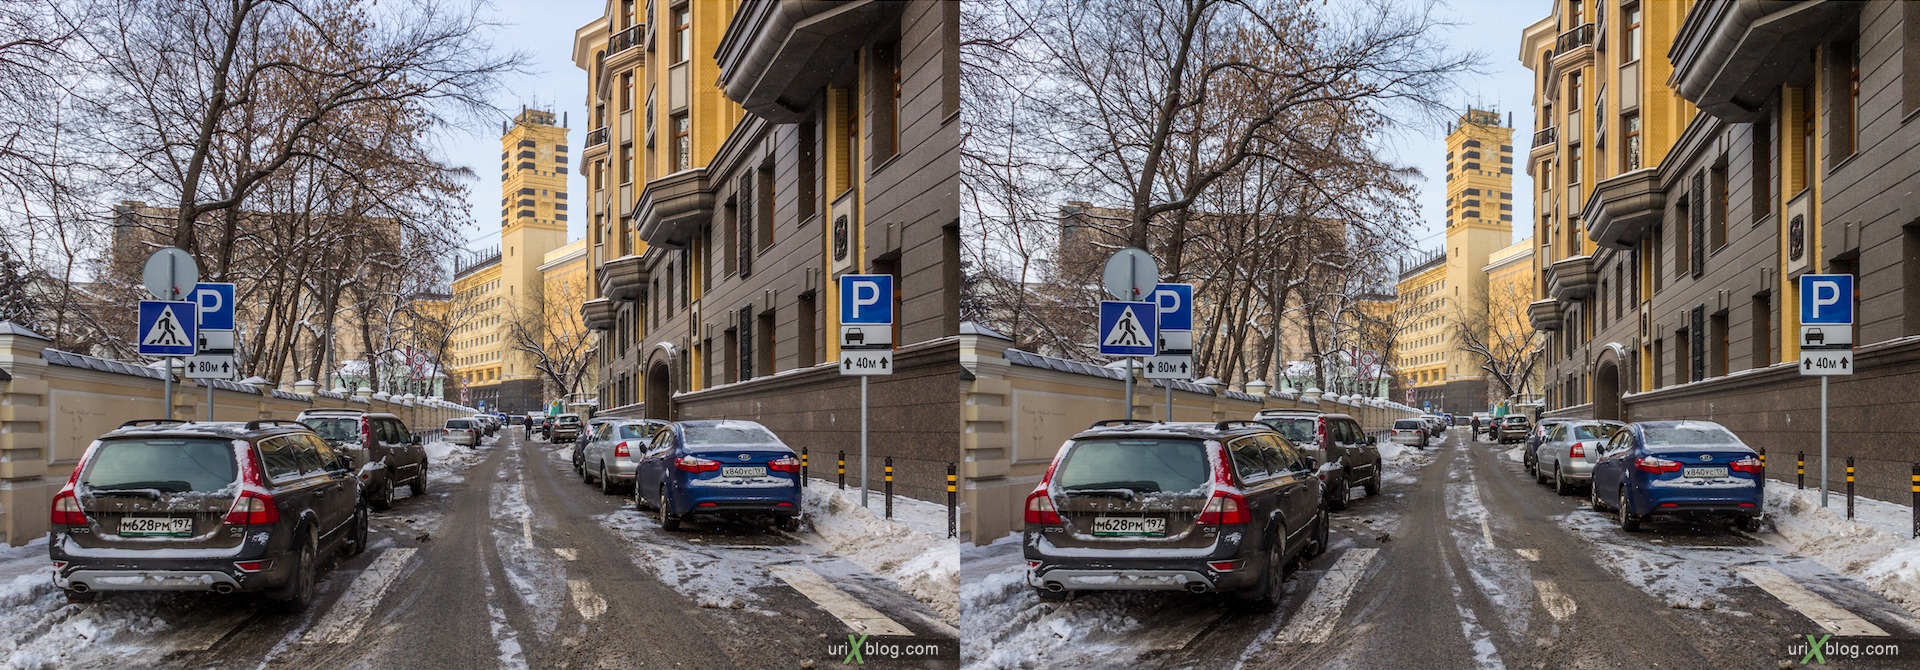 2013, Moscow, street, snow, winter, city, Russia, 3D, stereo pair, cross-eyed, crossview, cross view stereo pair